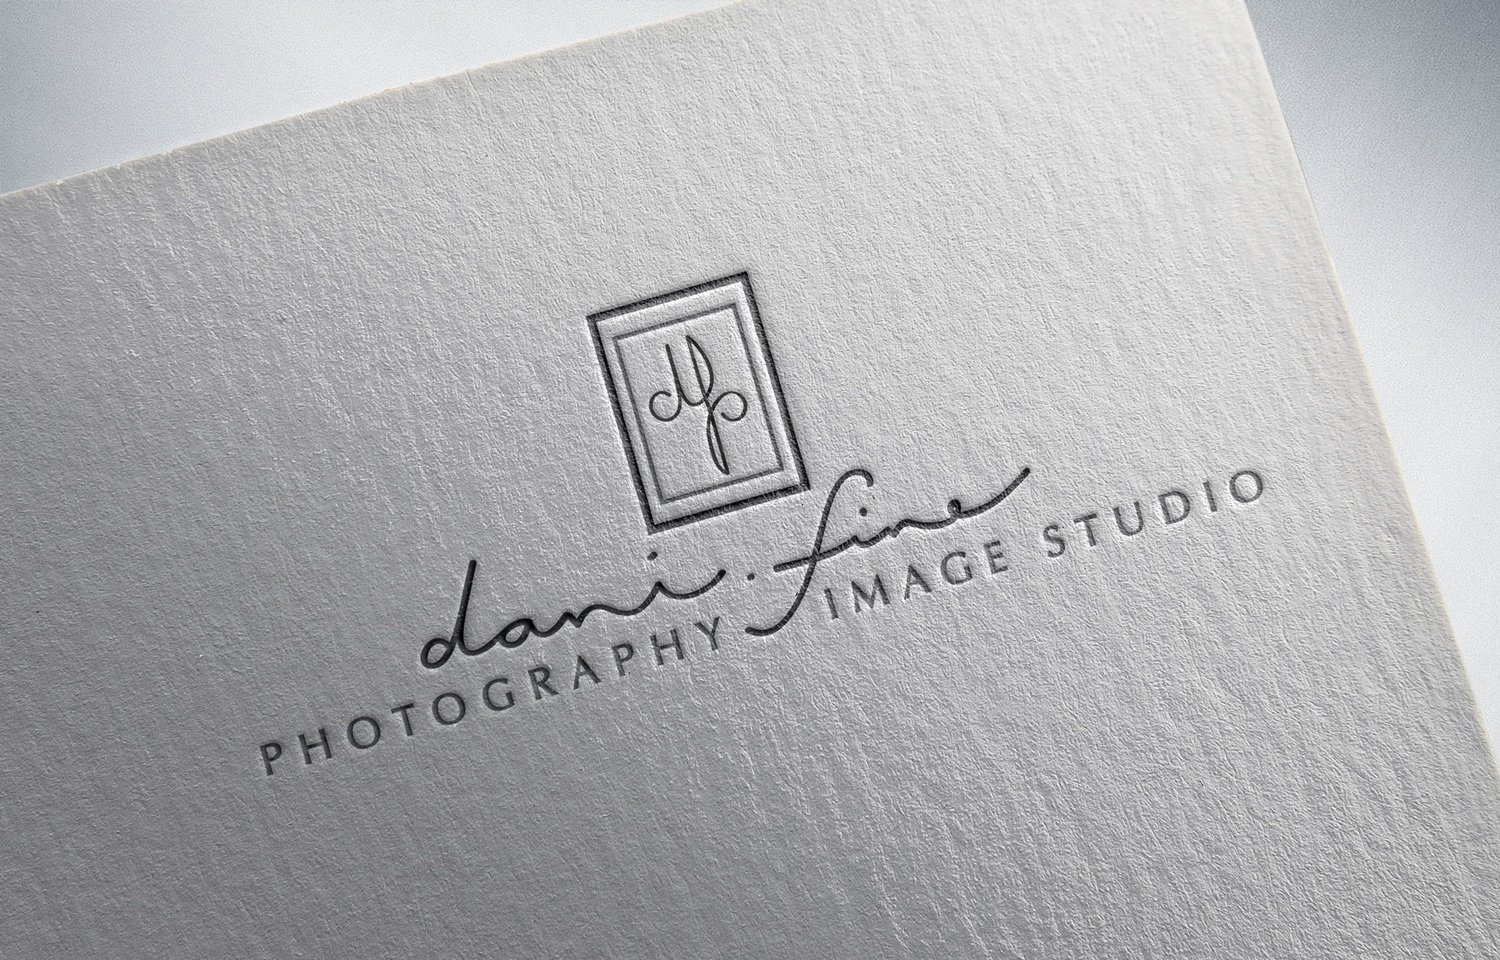  a hand lettered logo design for a photography studio with elegant letters and a clean appearance. The logo is displayed on a letterpress business card and reads dani. fine photography and image studio 